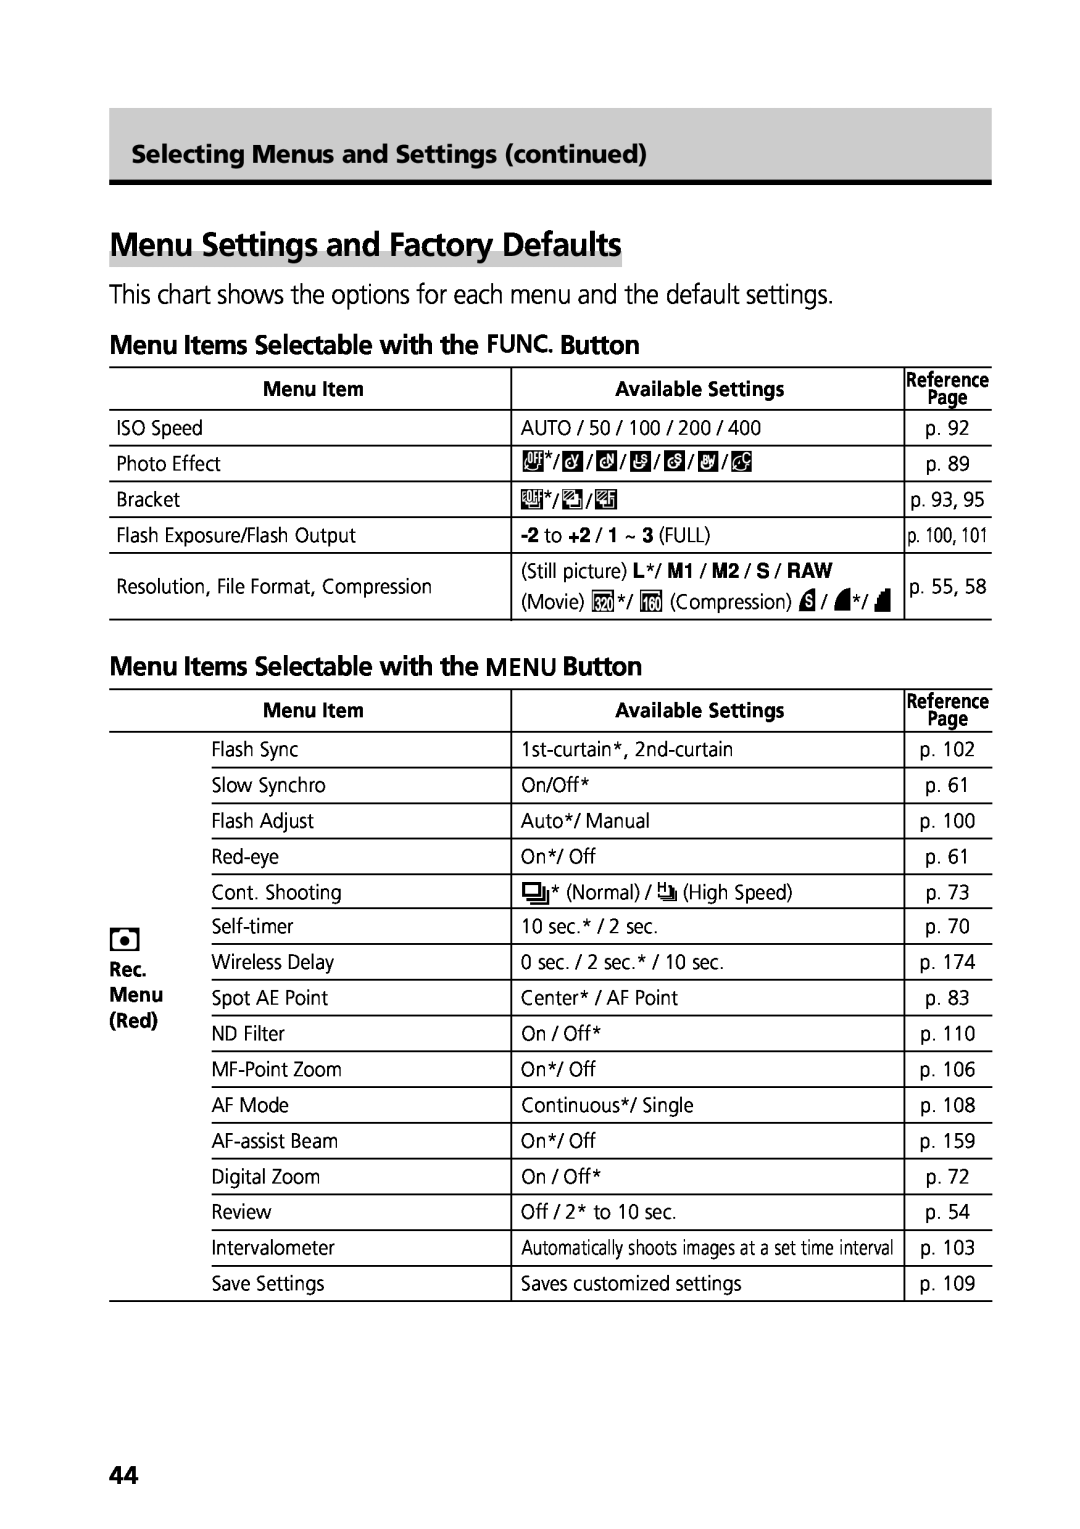 Canon G3 Menu Settings and Factory Defaults, Menu Items Selectable with the Button, Selecting Menus and Settings continued 